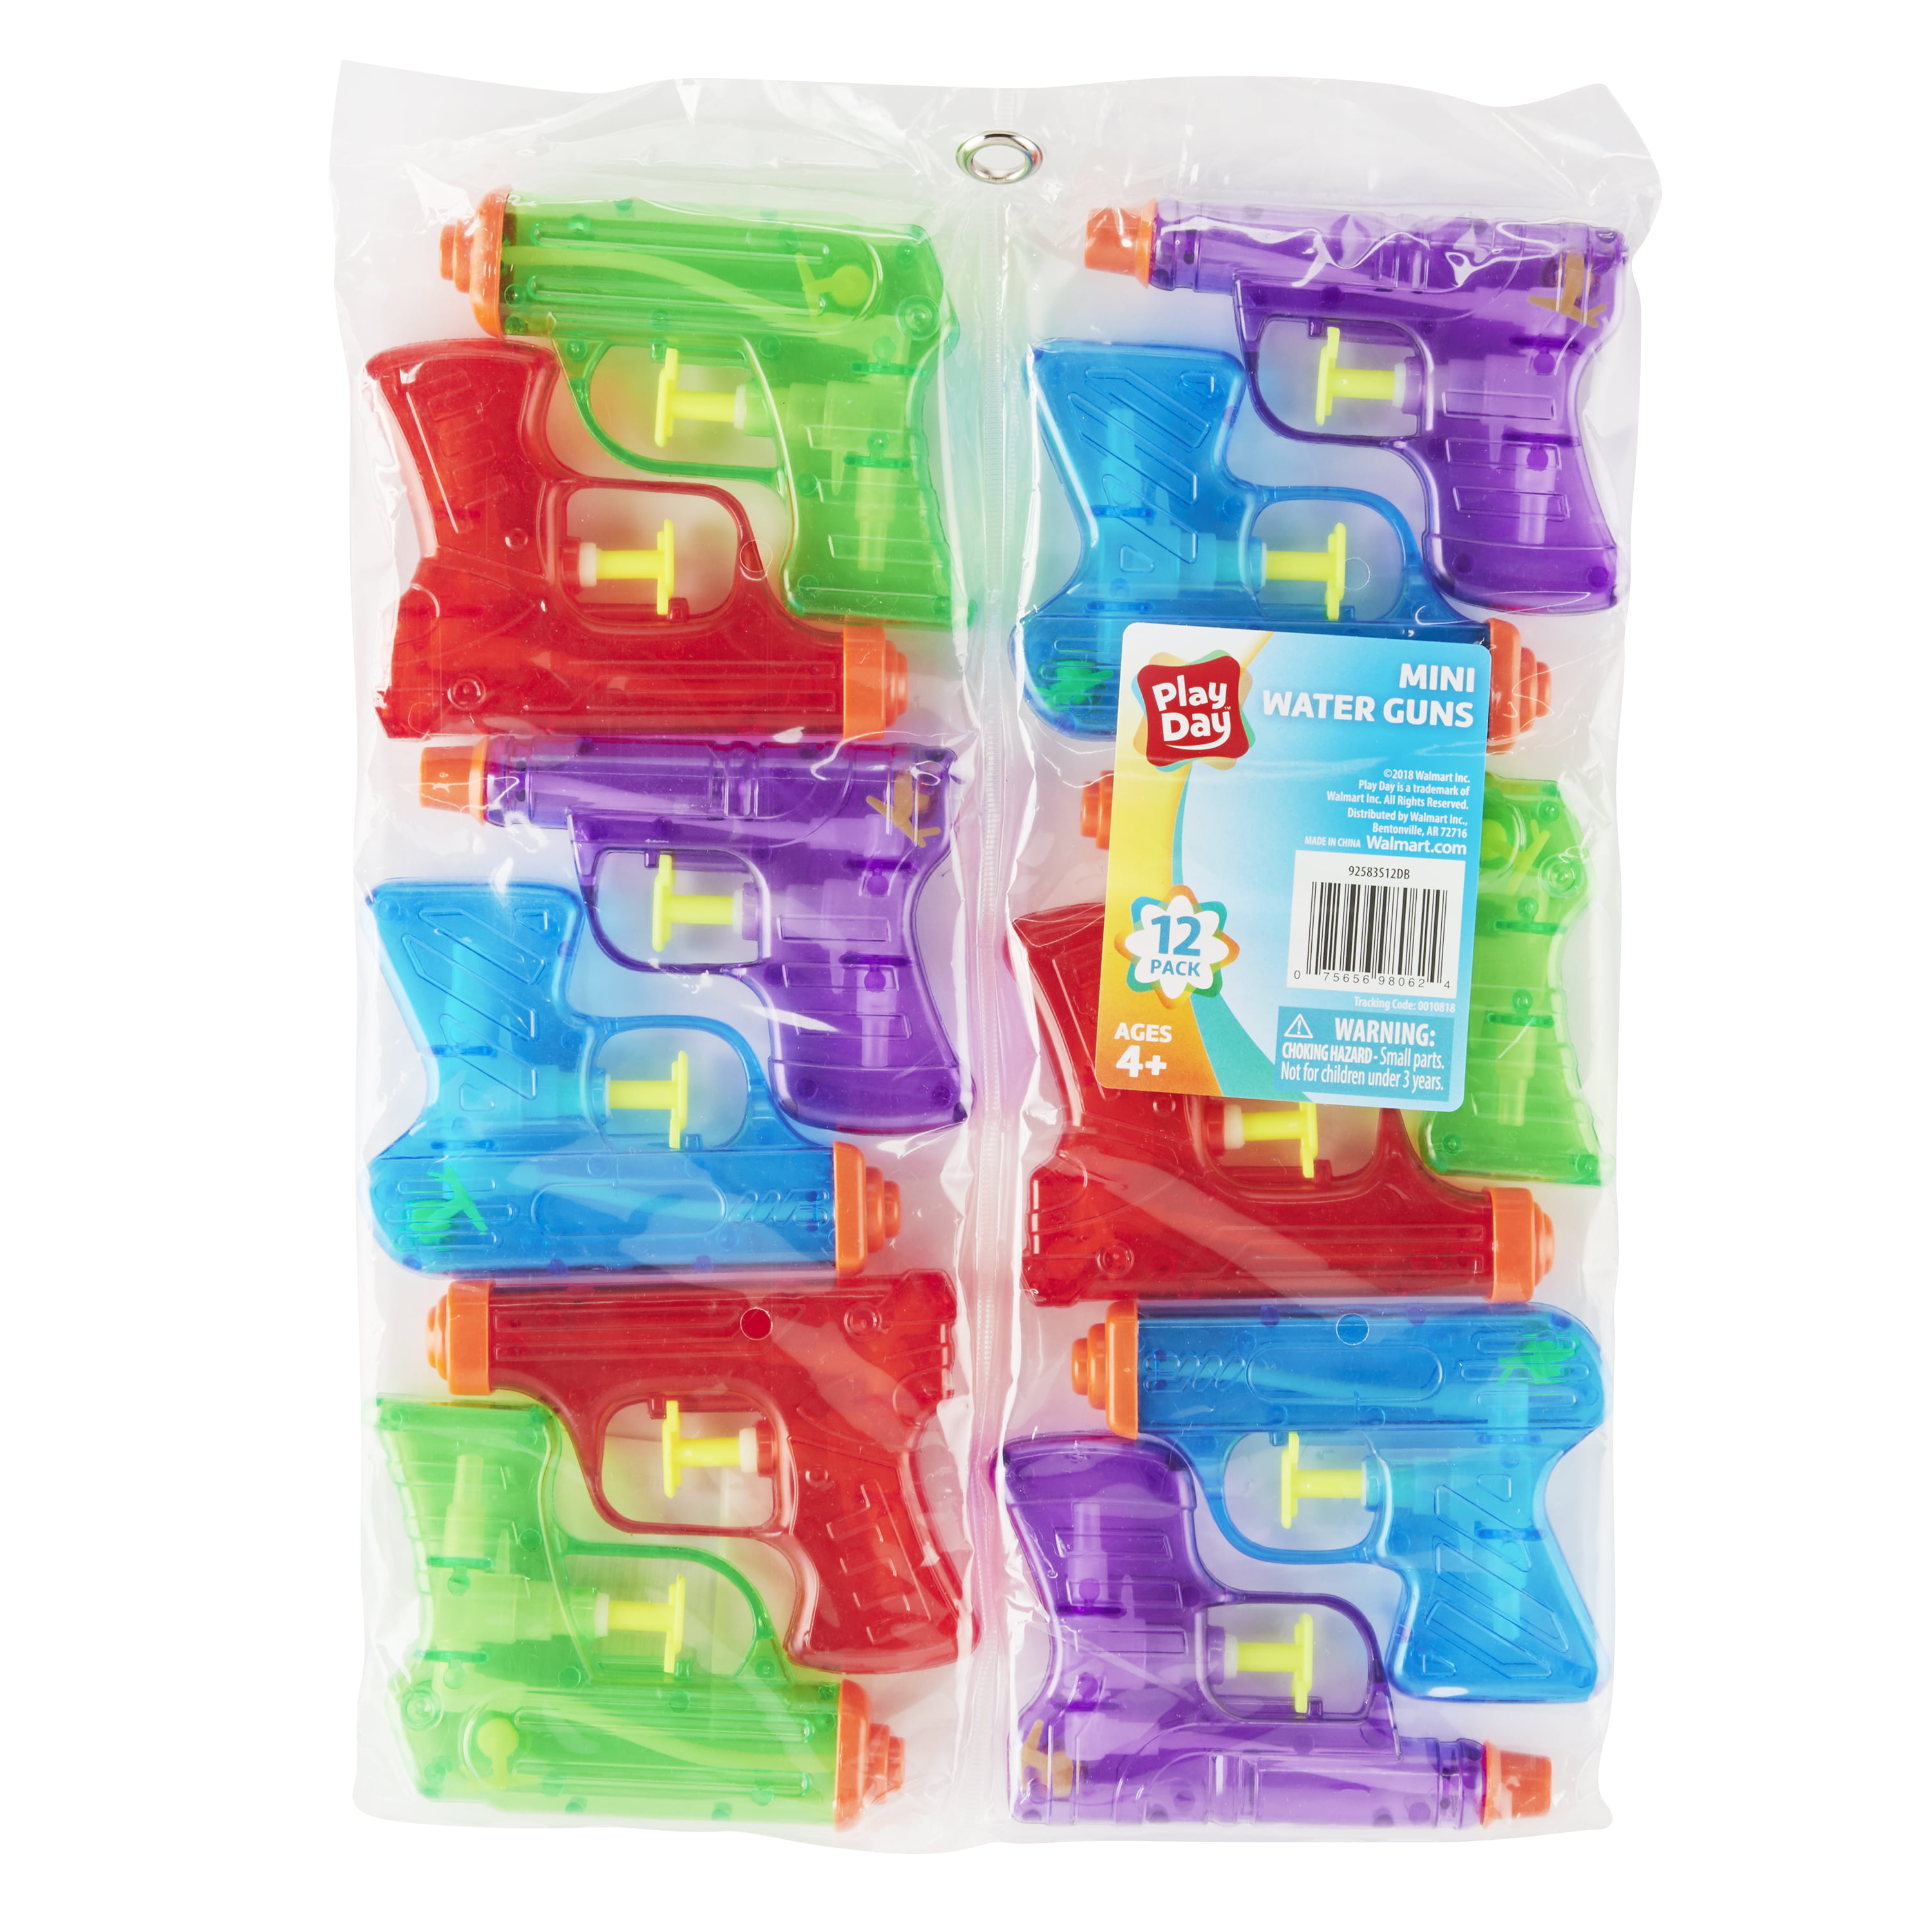 12 Play Day Mini Water Guns Assorted Colors Kid Toys Party PK School's out for sale online 